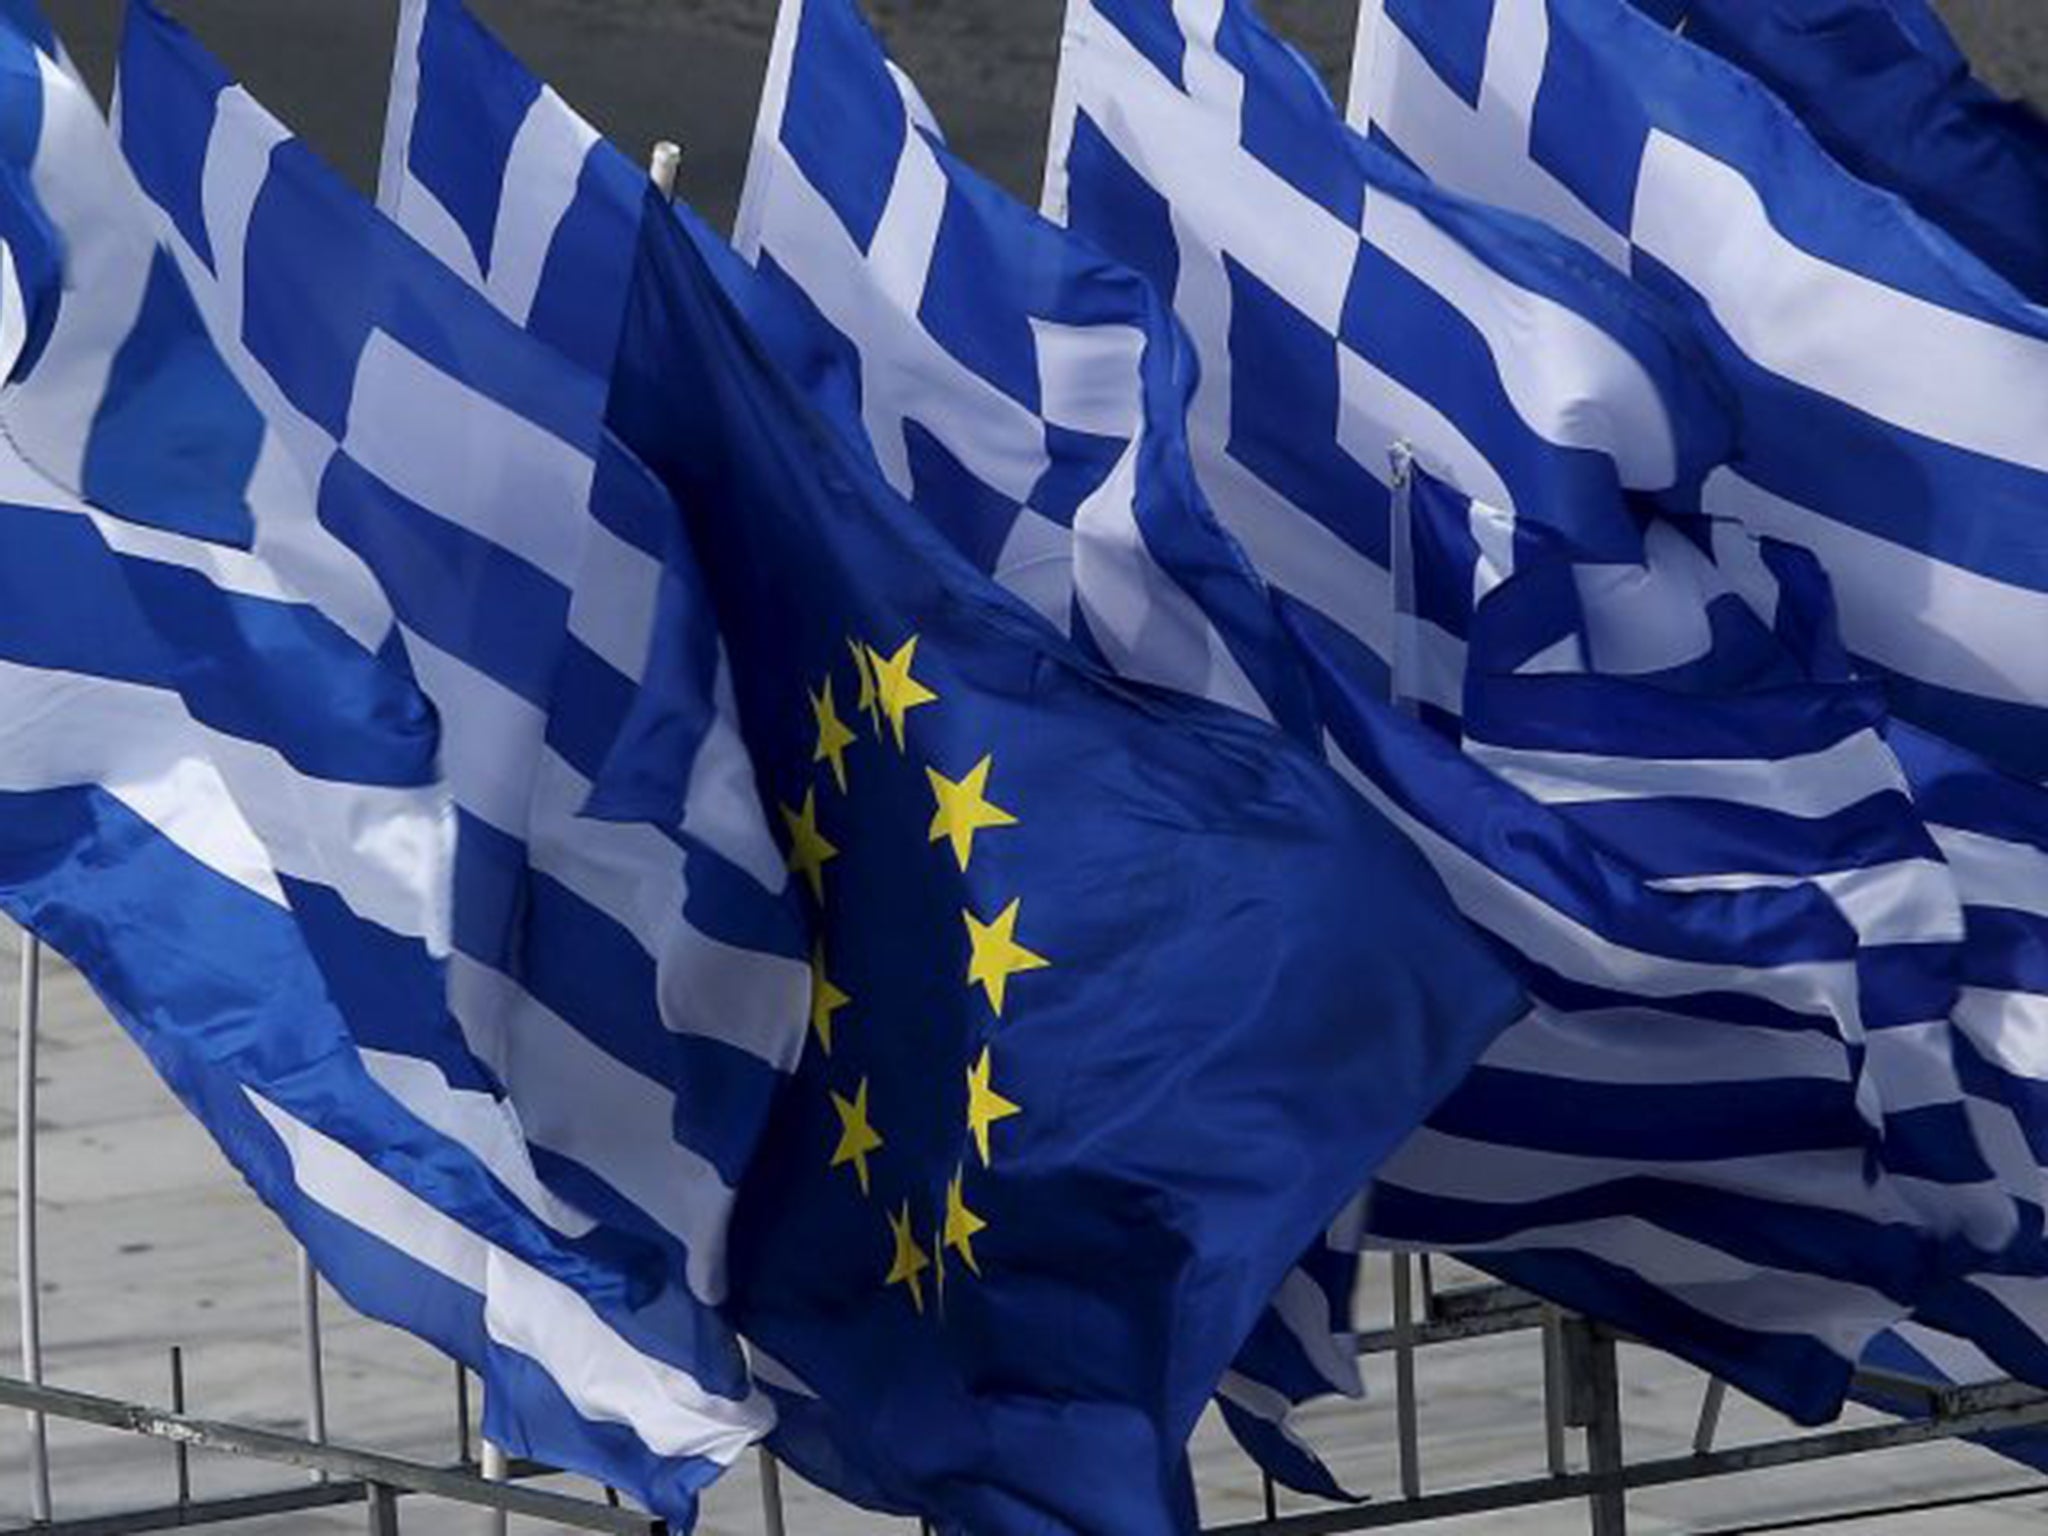 While the details of Greece’s concessions were not made public, it has been suggested that they include an increase in the VAT rate for selected items, as well as a fresh tax on business and the wealthy